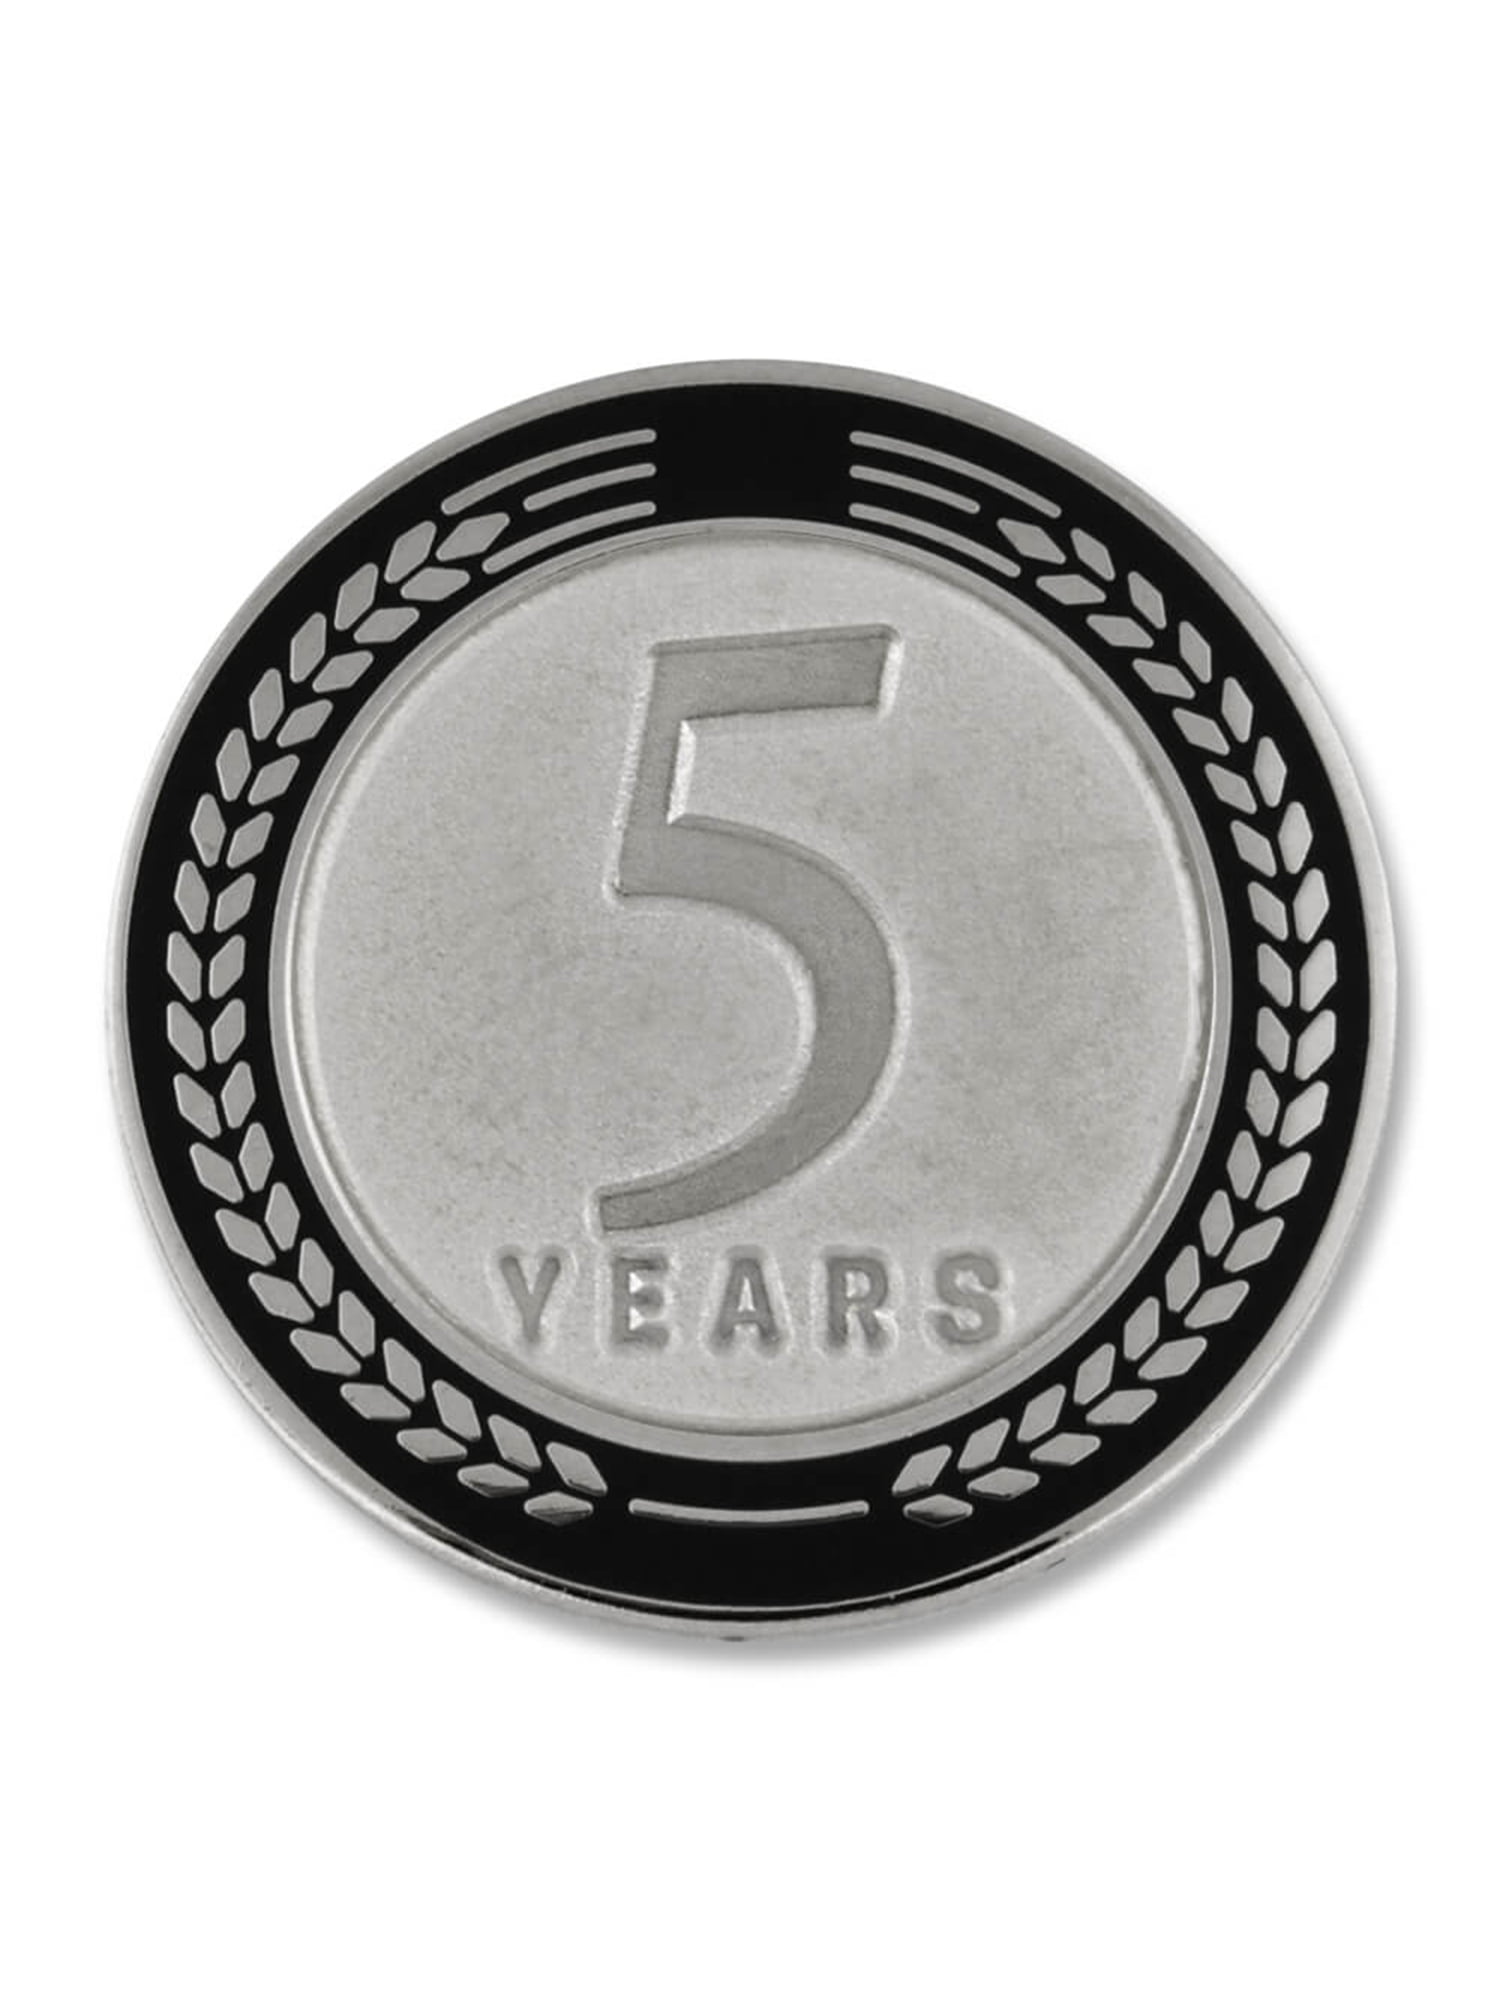 Black PinMart 11 Years of Service Award Employee Recognition Gift Lapel Pin